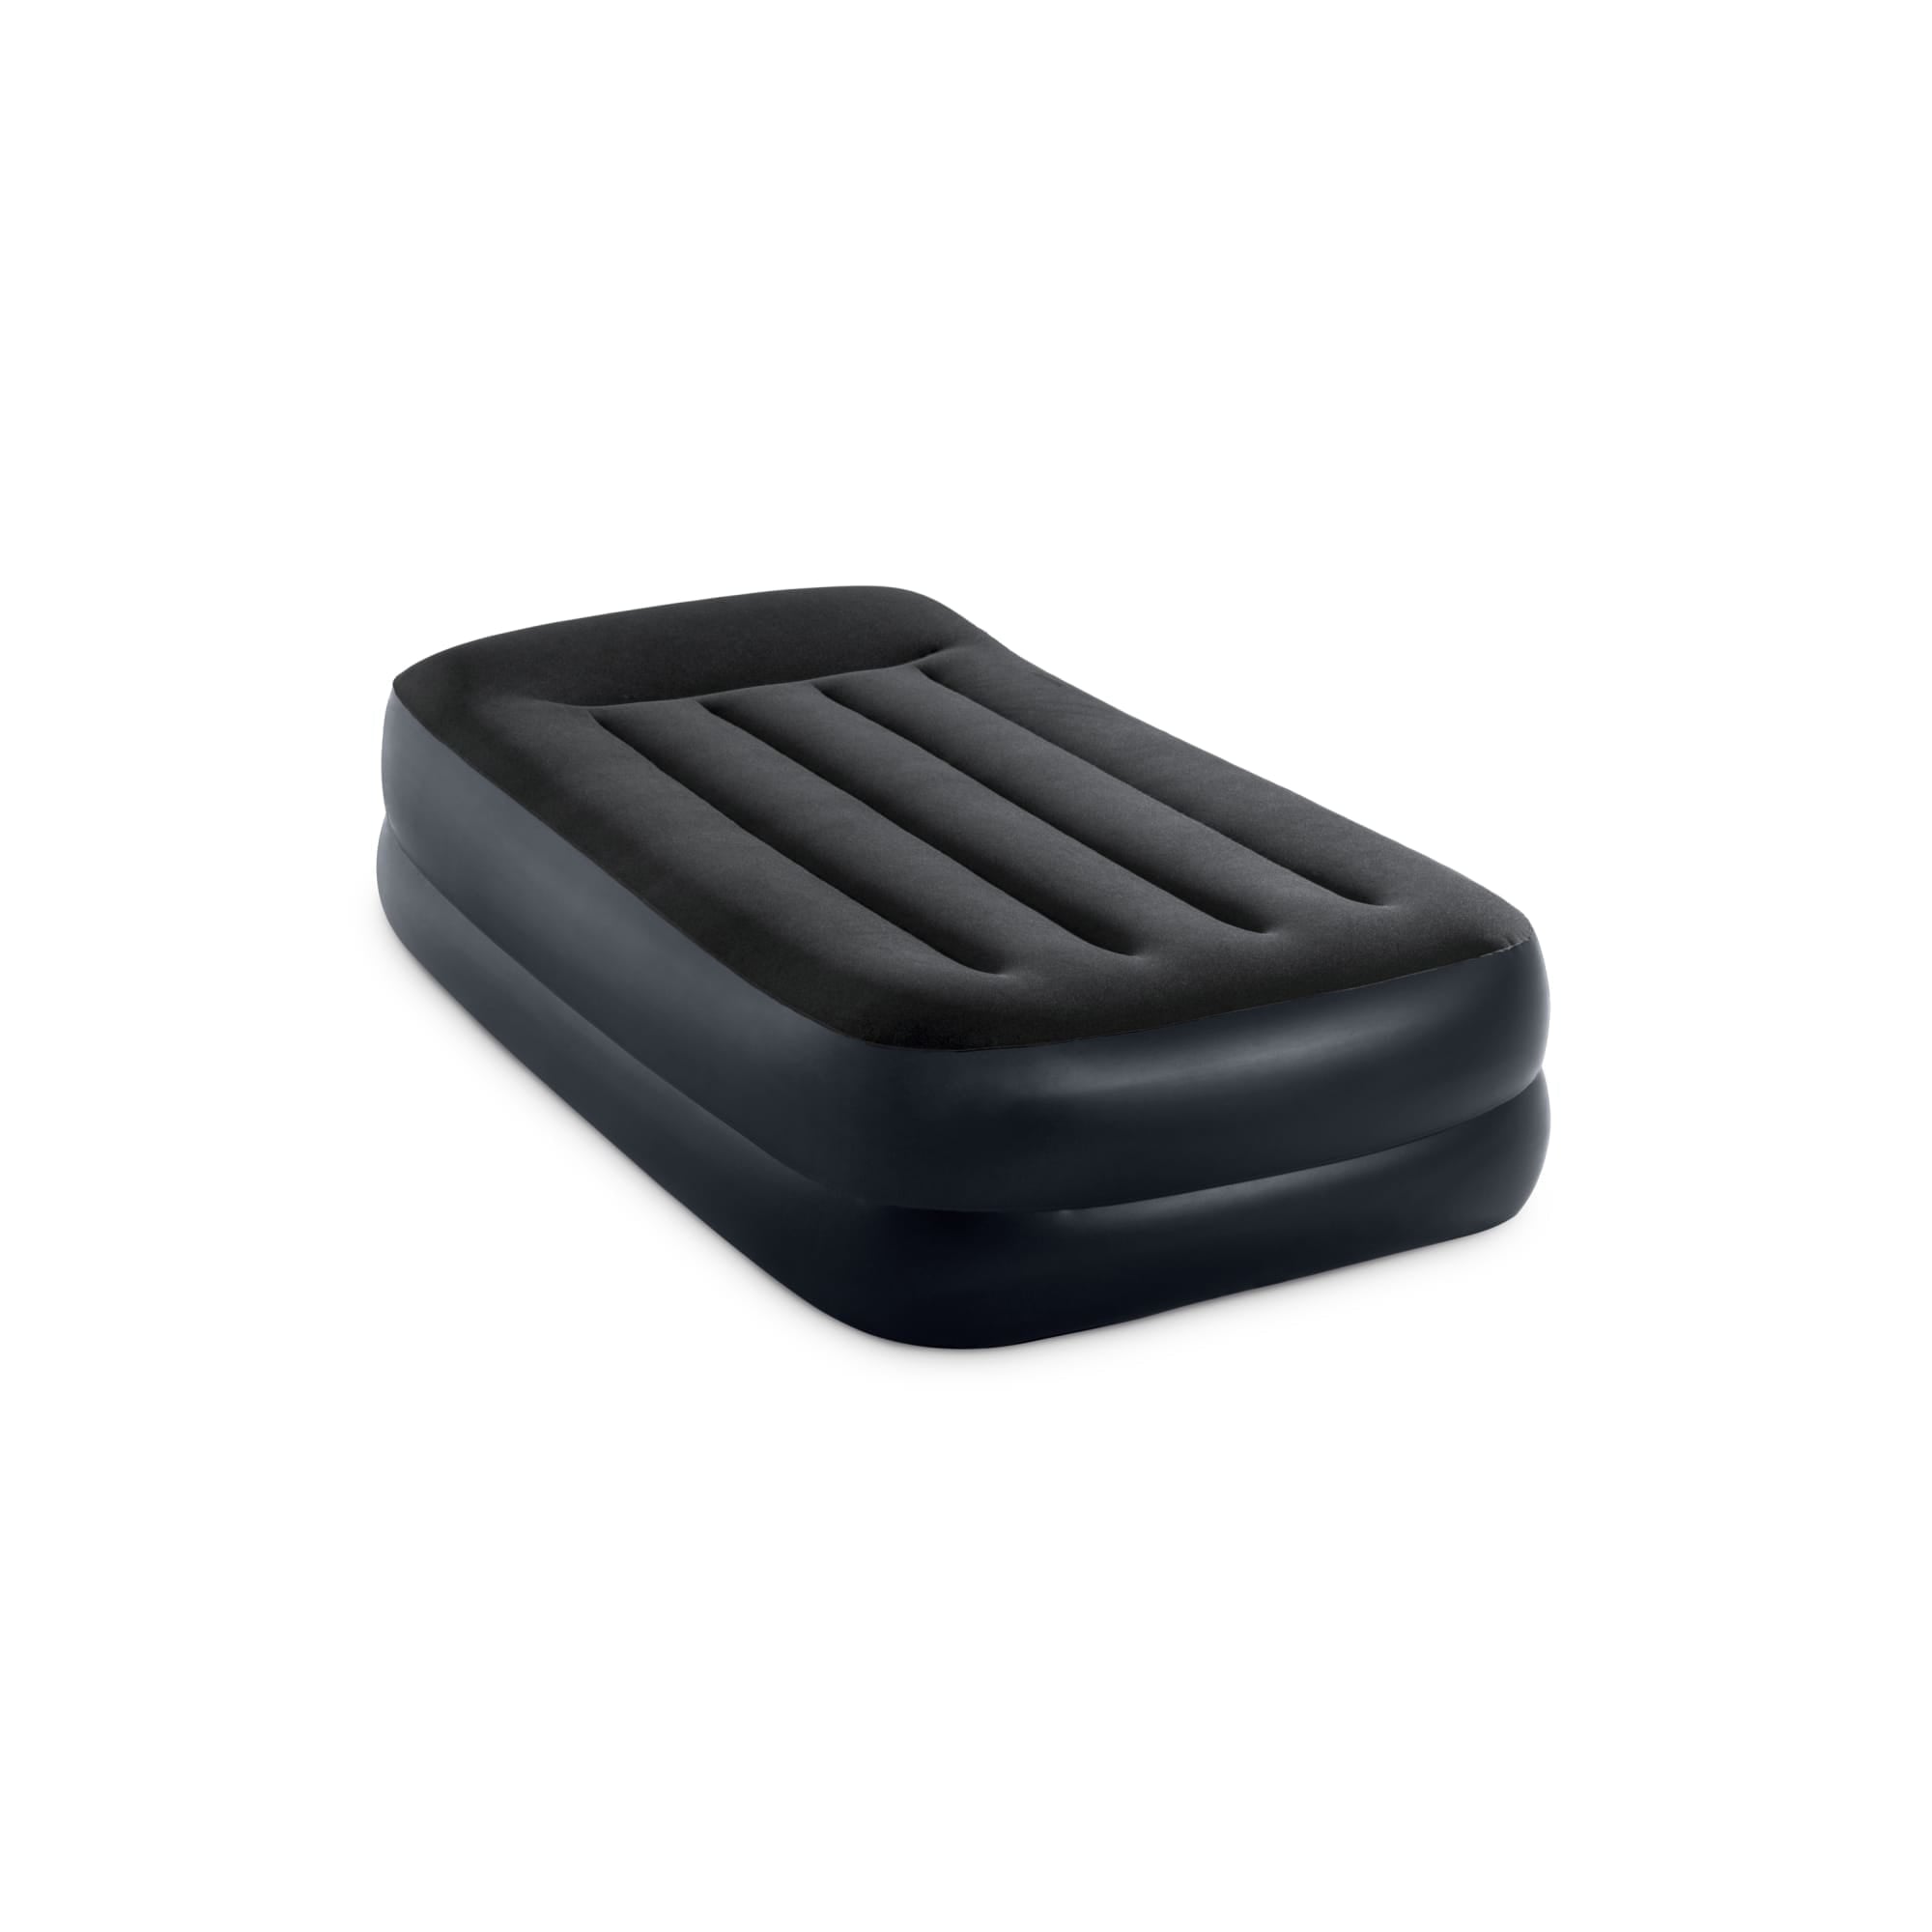 Intex Twin Dura-Beam Pillow Rest Raised Air Bed with Internal Pump $50.00 EACH, CASE PACK OF 3